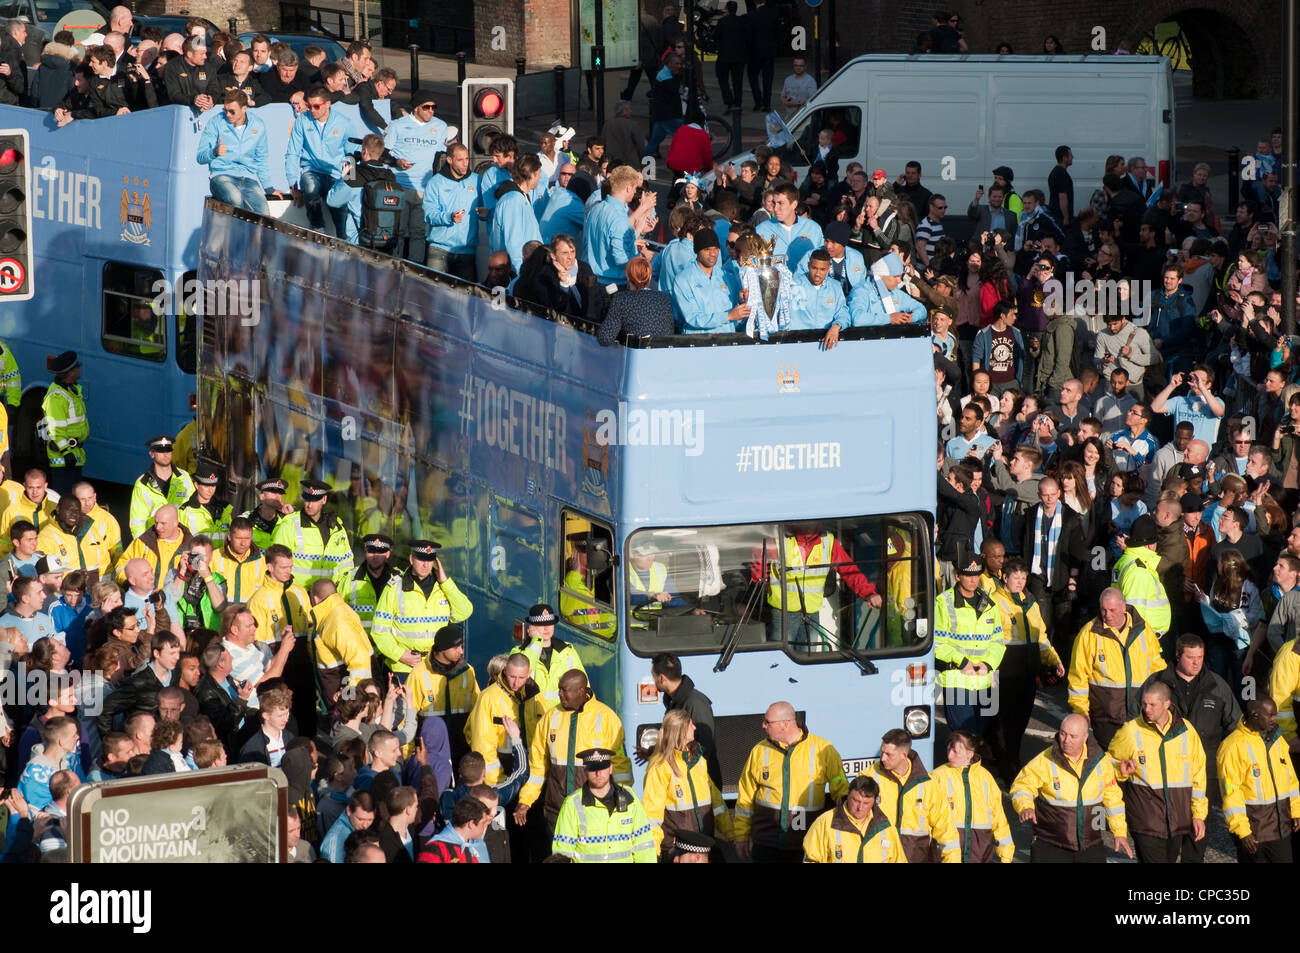 Manchester City FC Premier League Trophy Parade. 100,000 blues fans turn out to celebrate victory for their club. Stock Photo